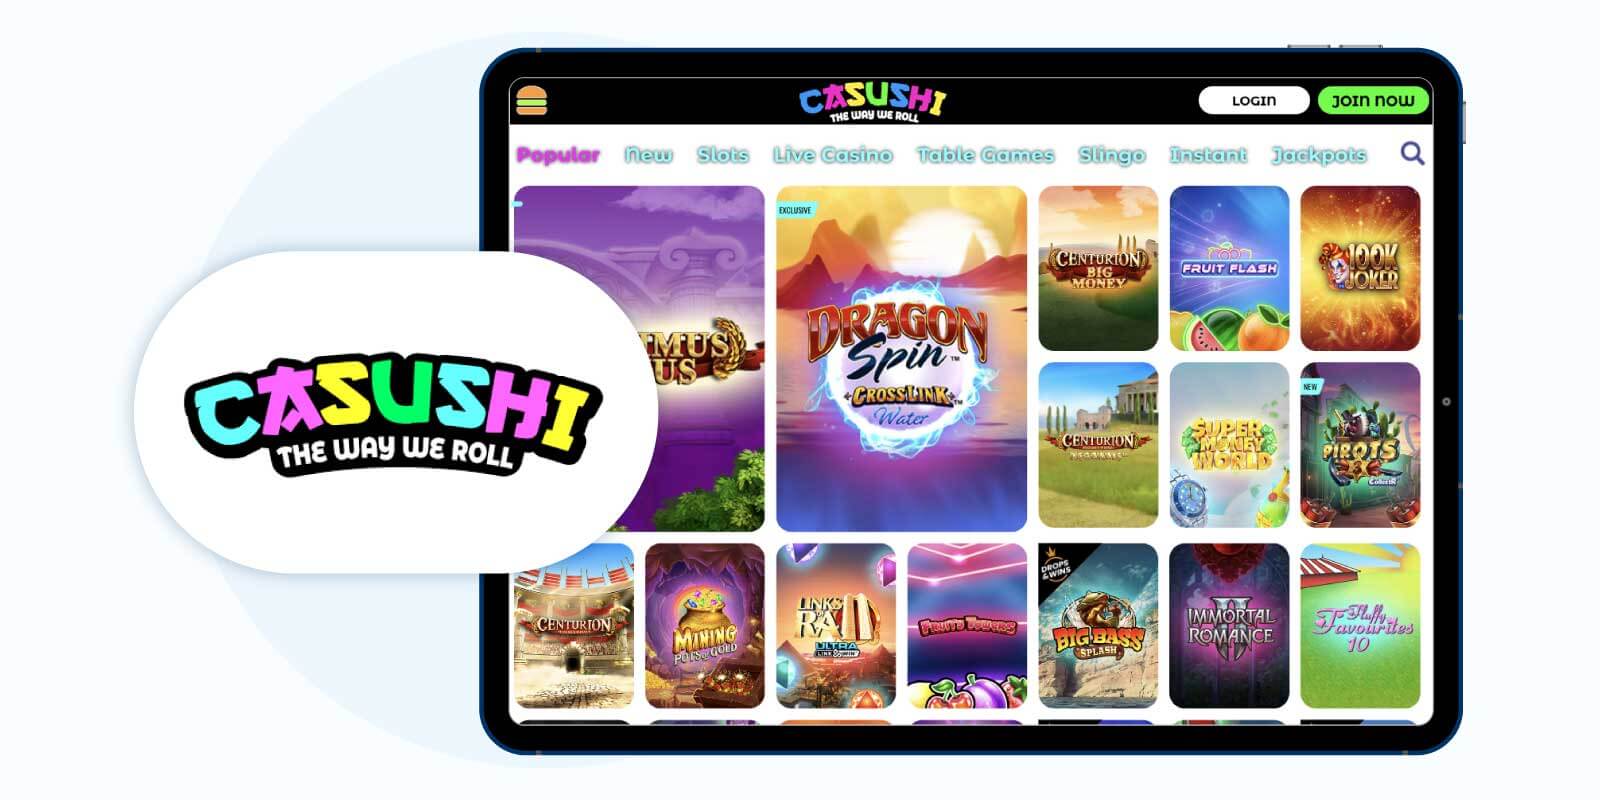 Casushi Casino - Top-Tier NetEent Casino UK For Unlimited Withdrawals